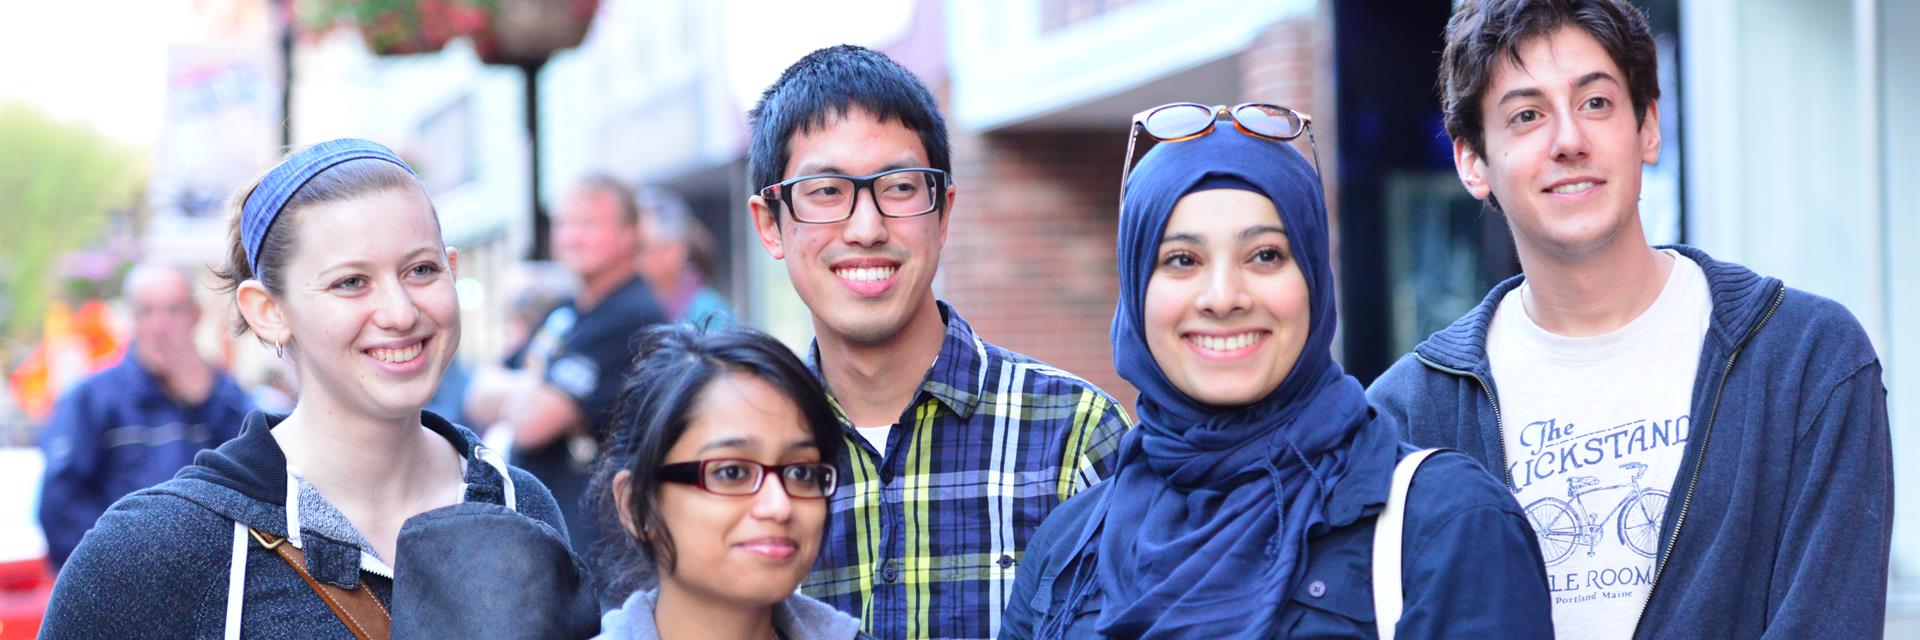 A group of students exploring the city, smiling at the camera.